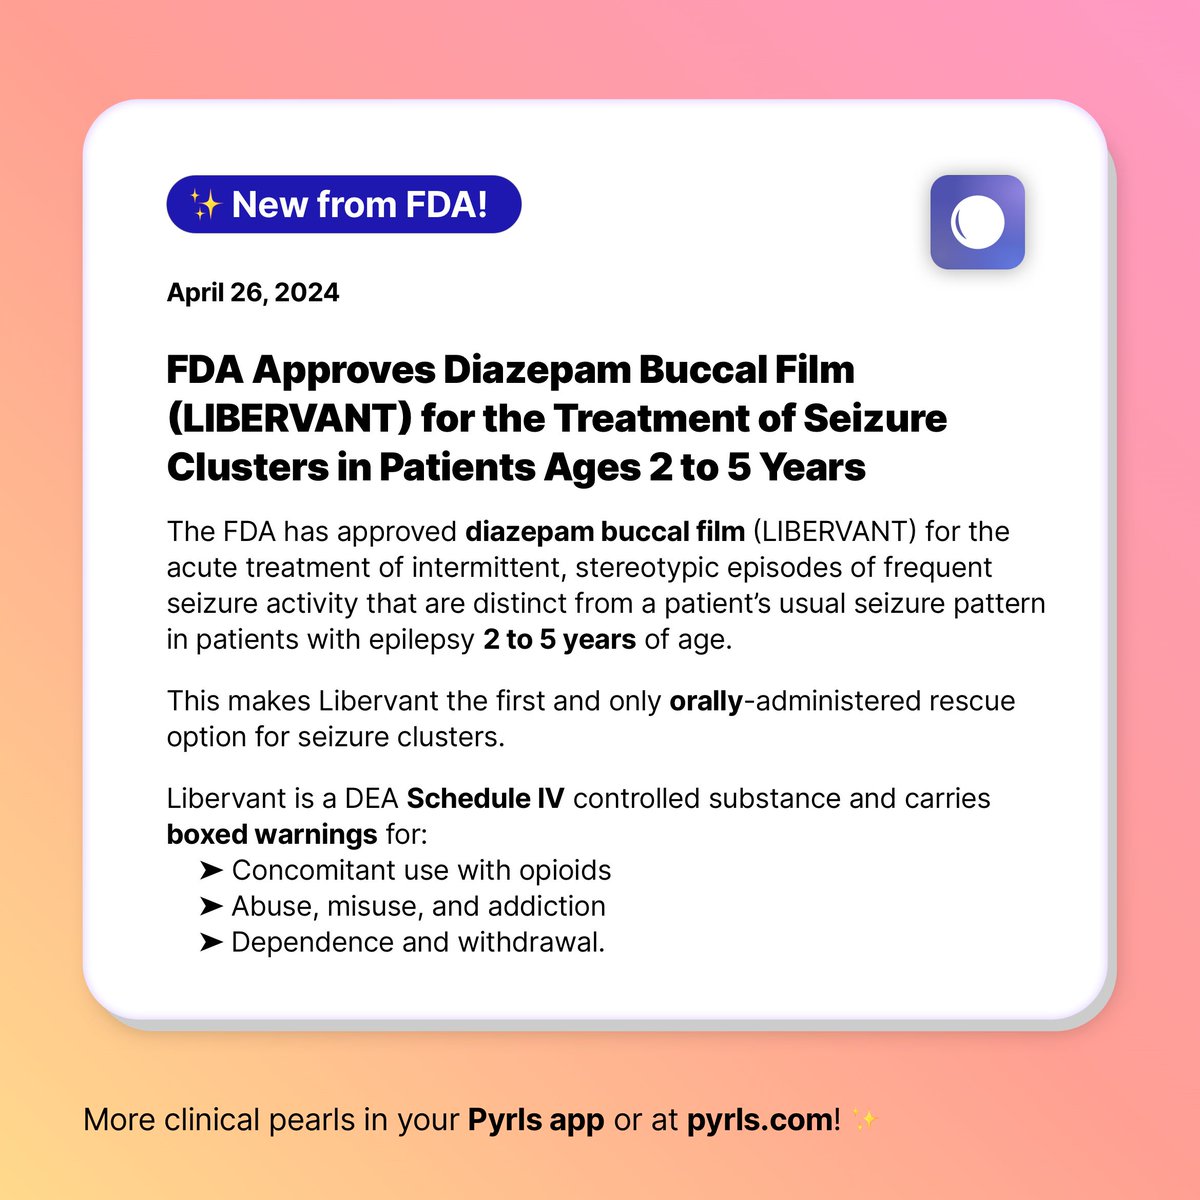 FDA Approves Diazepam Buccal Film (LIBERVANT) for the Treatment of Seizure Clusters in Patients Ages 2 to 5 Years